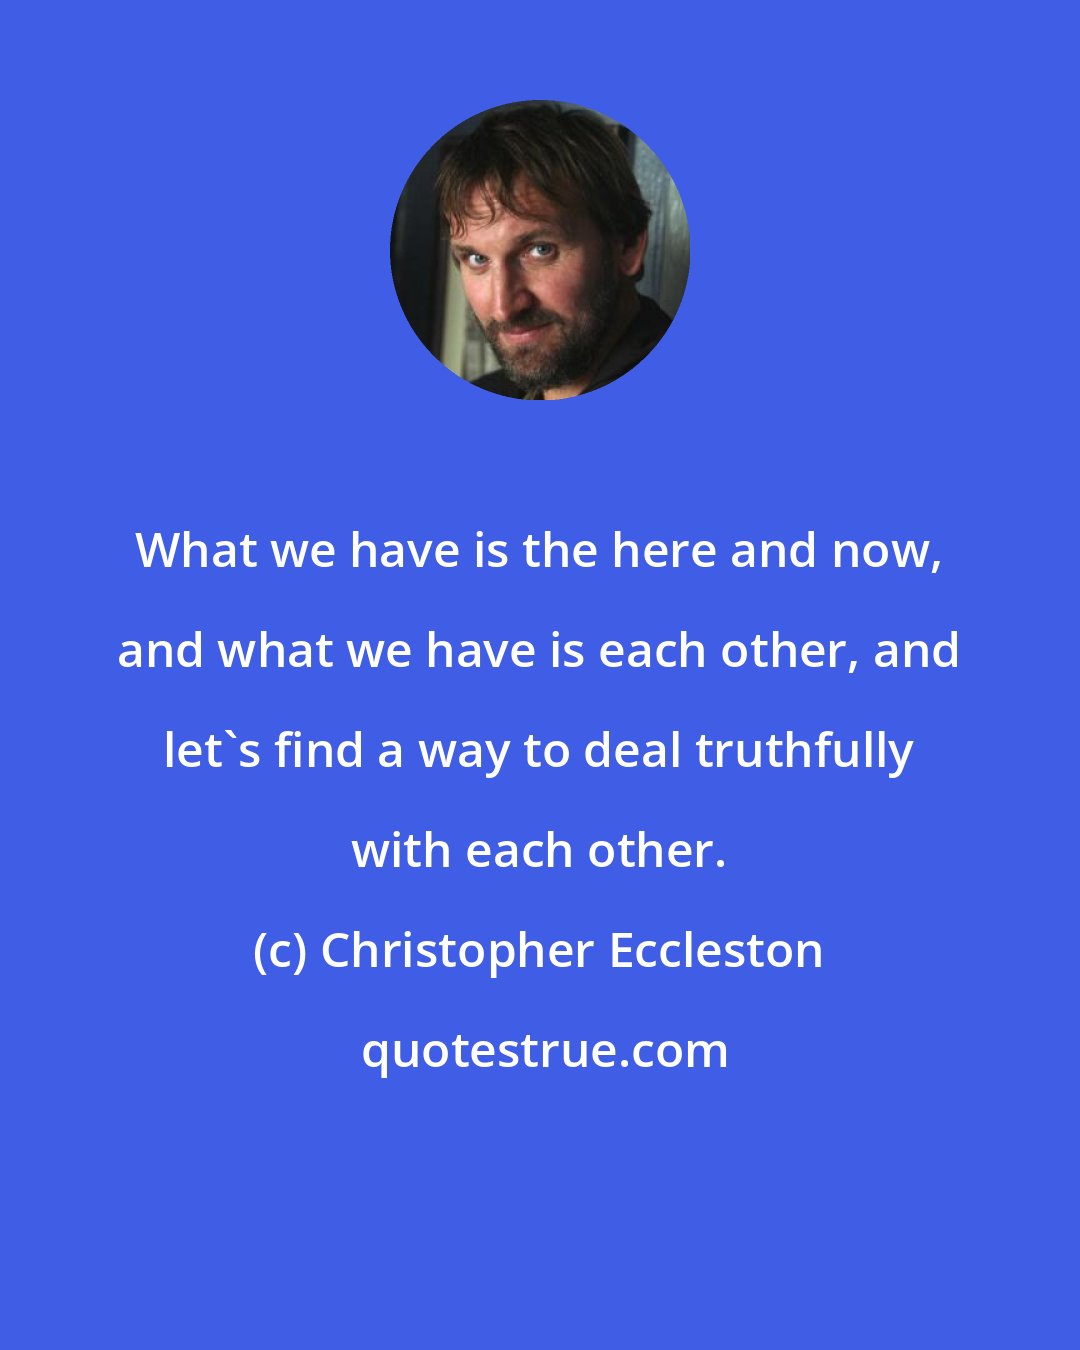 Christopher Eccleston: What we have is the here and now, and what we have is each other, and let's find a way to deal truthfully with each other.